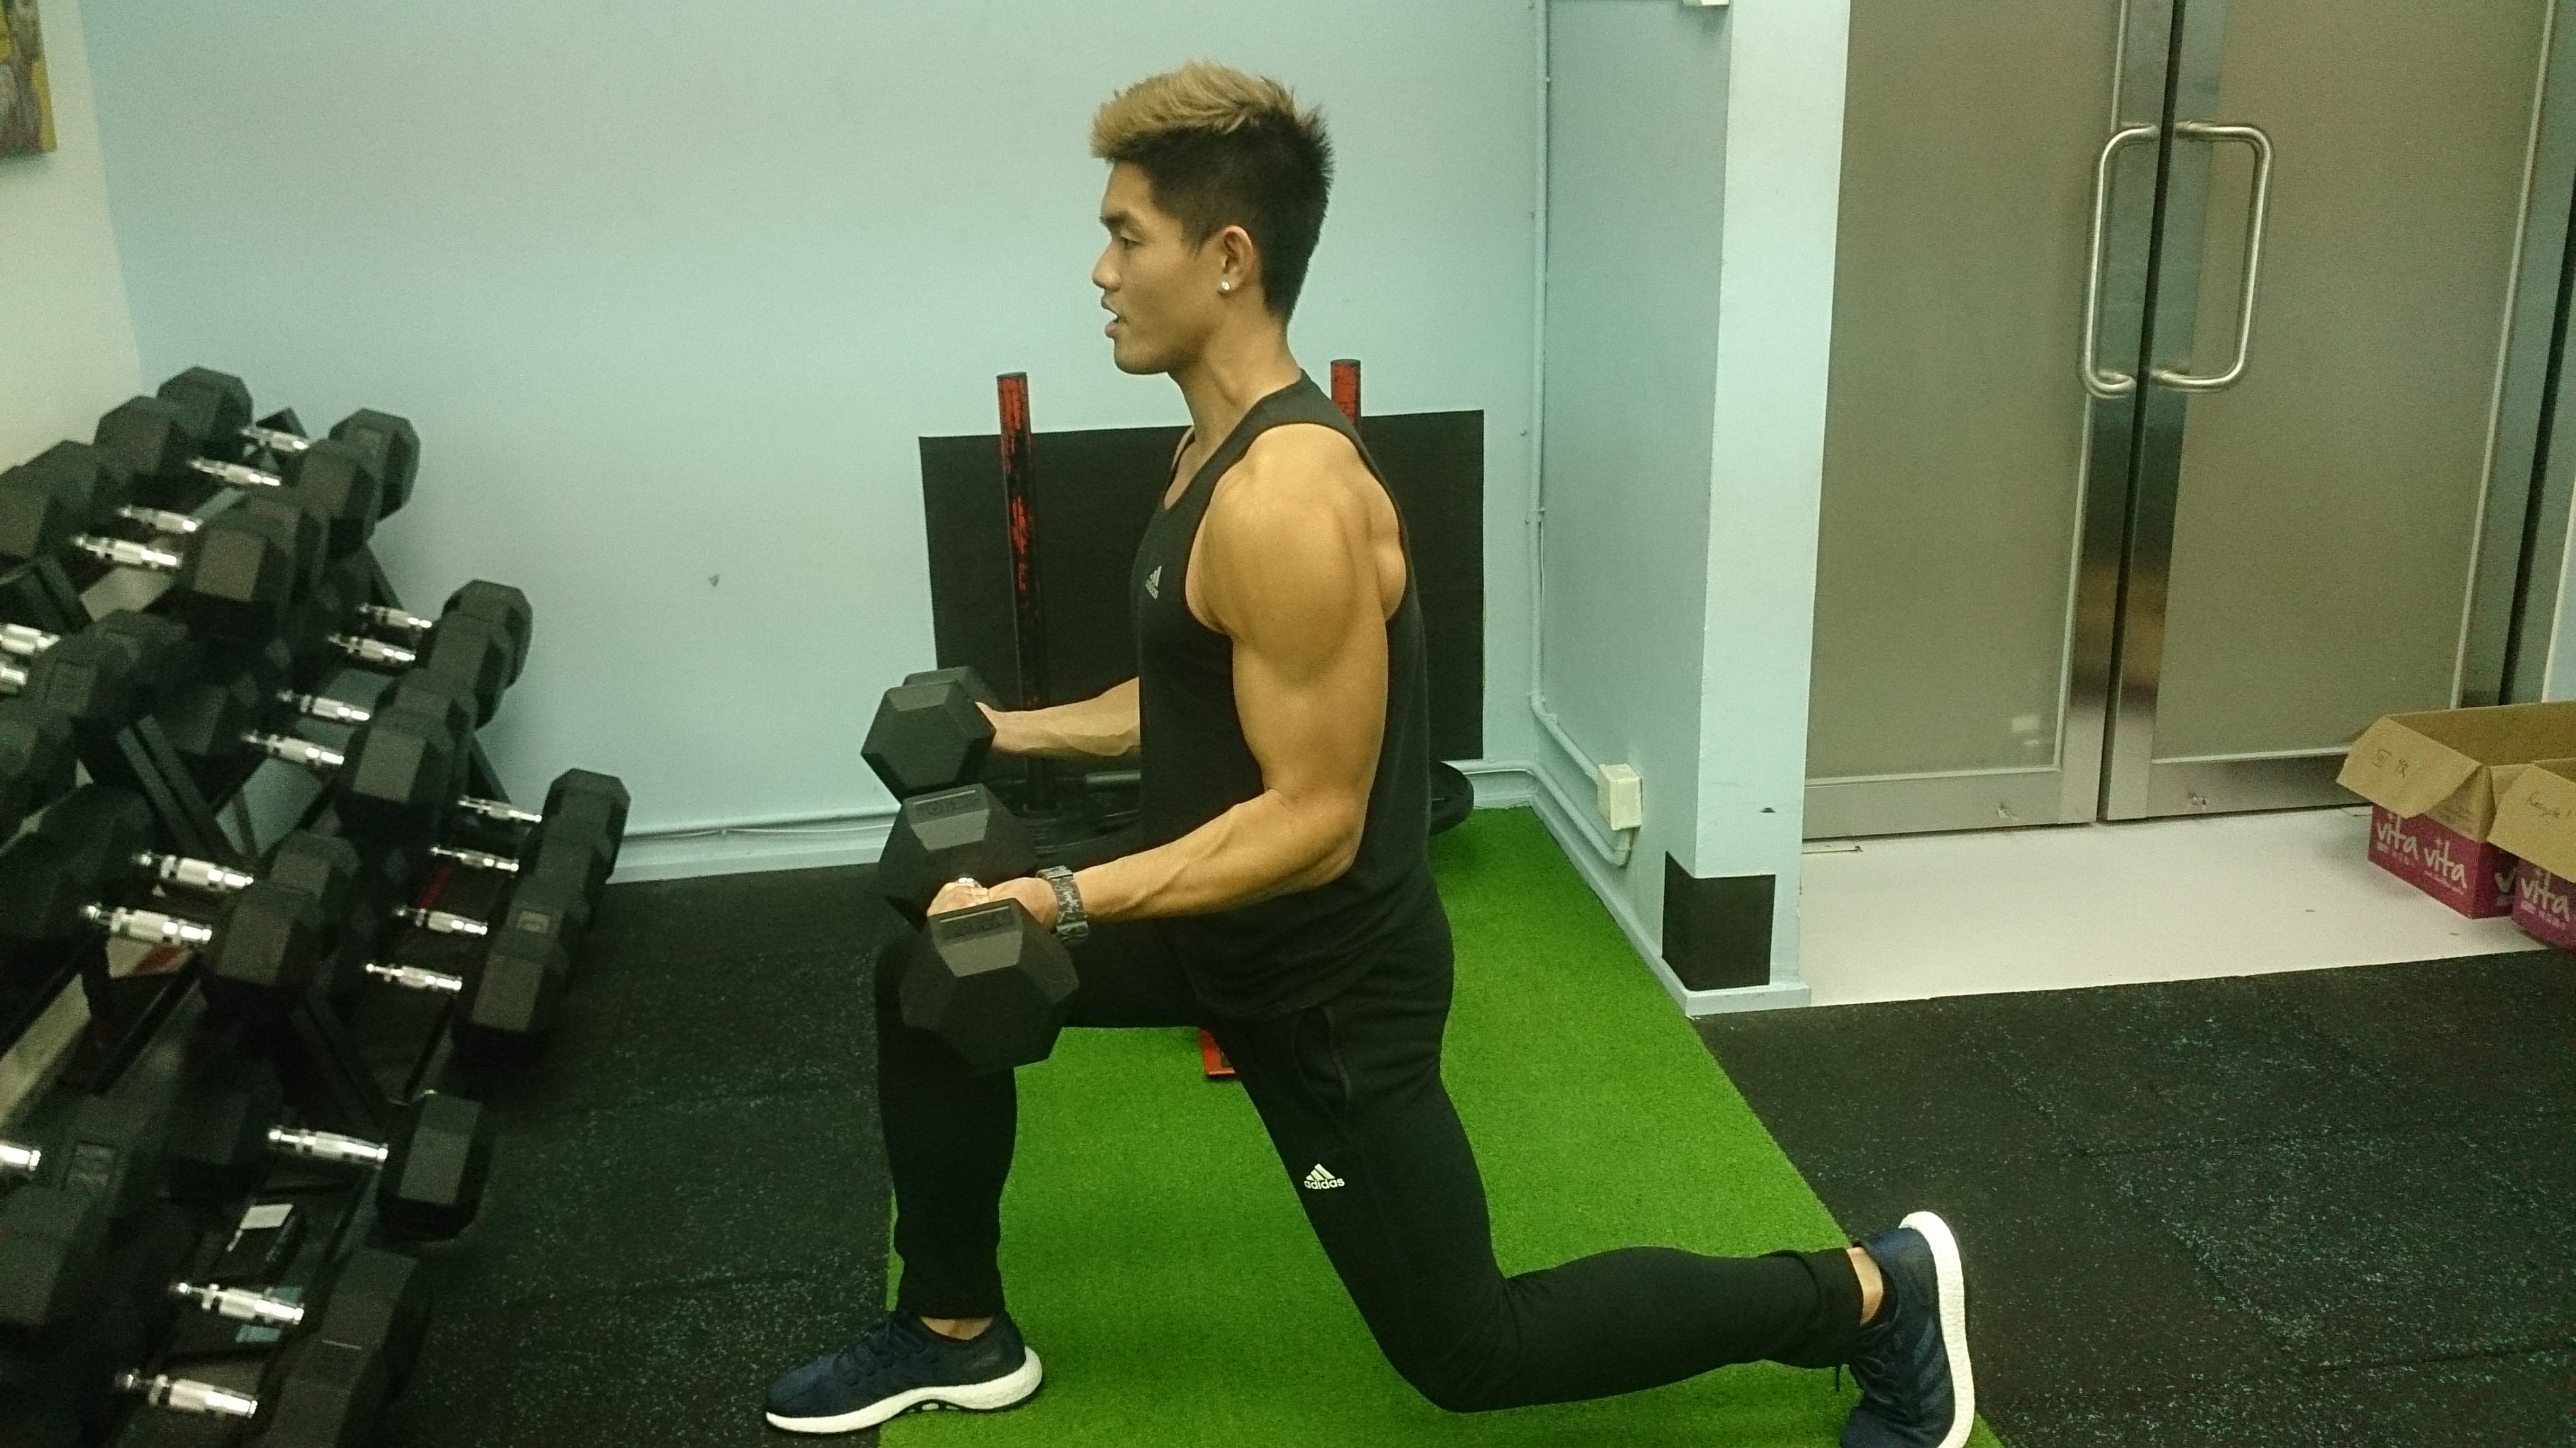 You can add different moves to your workout, as trainer Au Yeung shows.